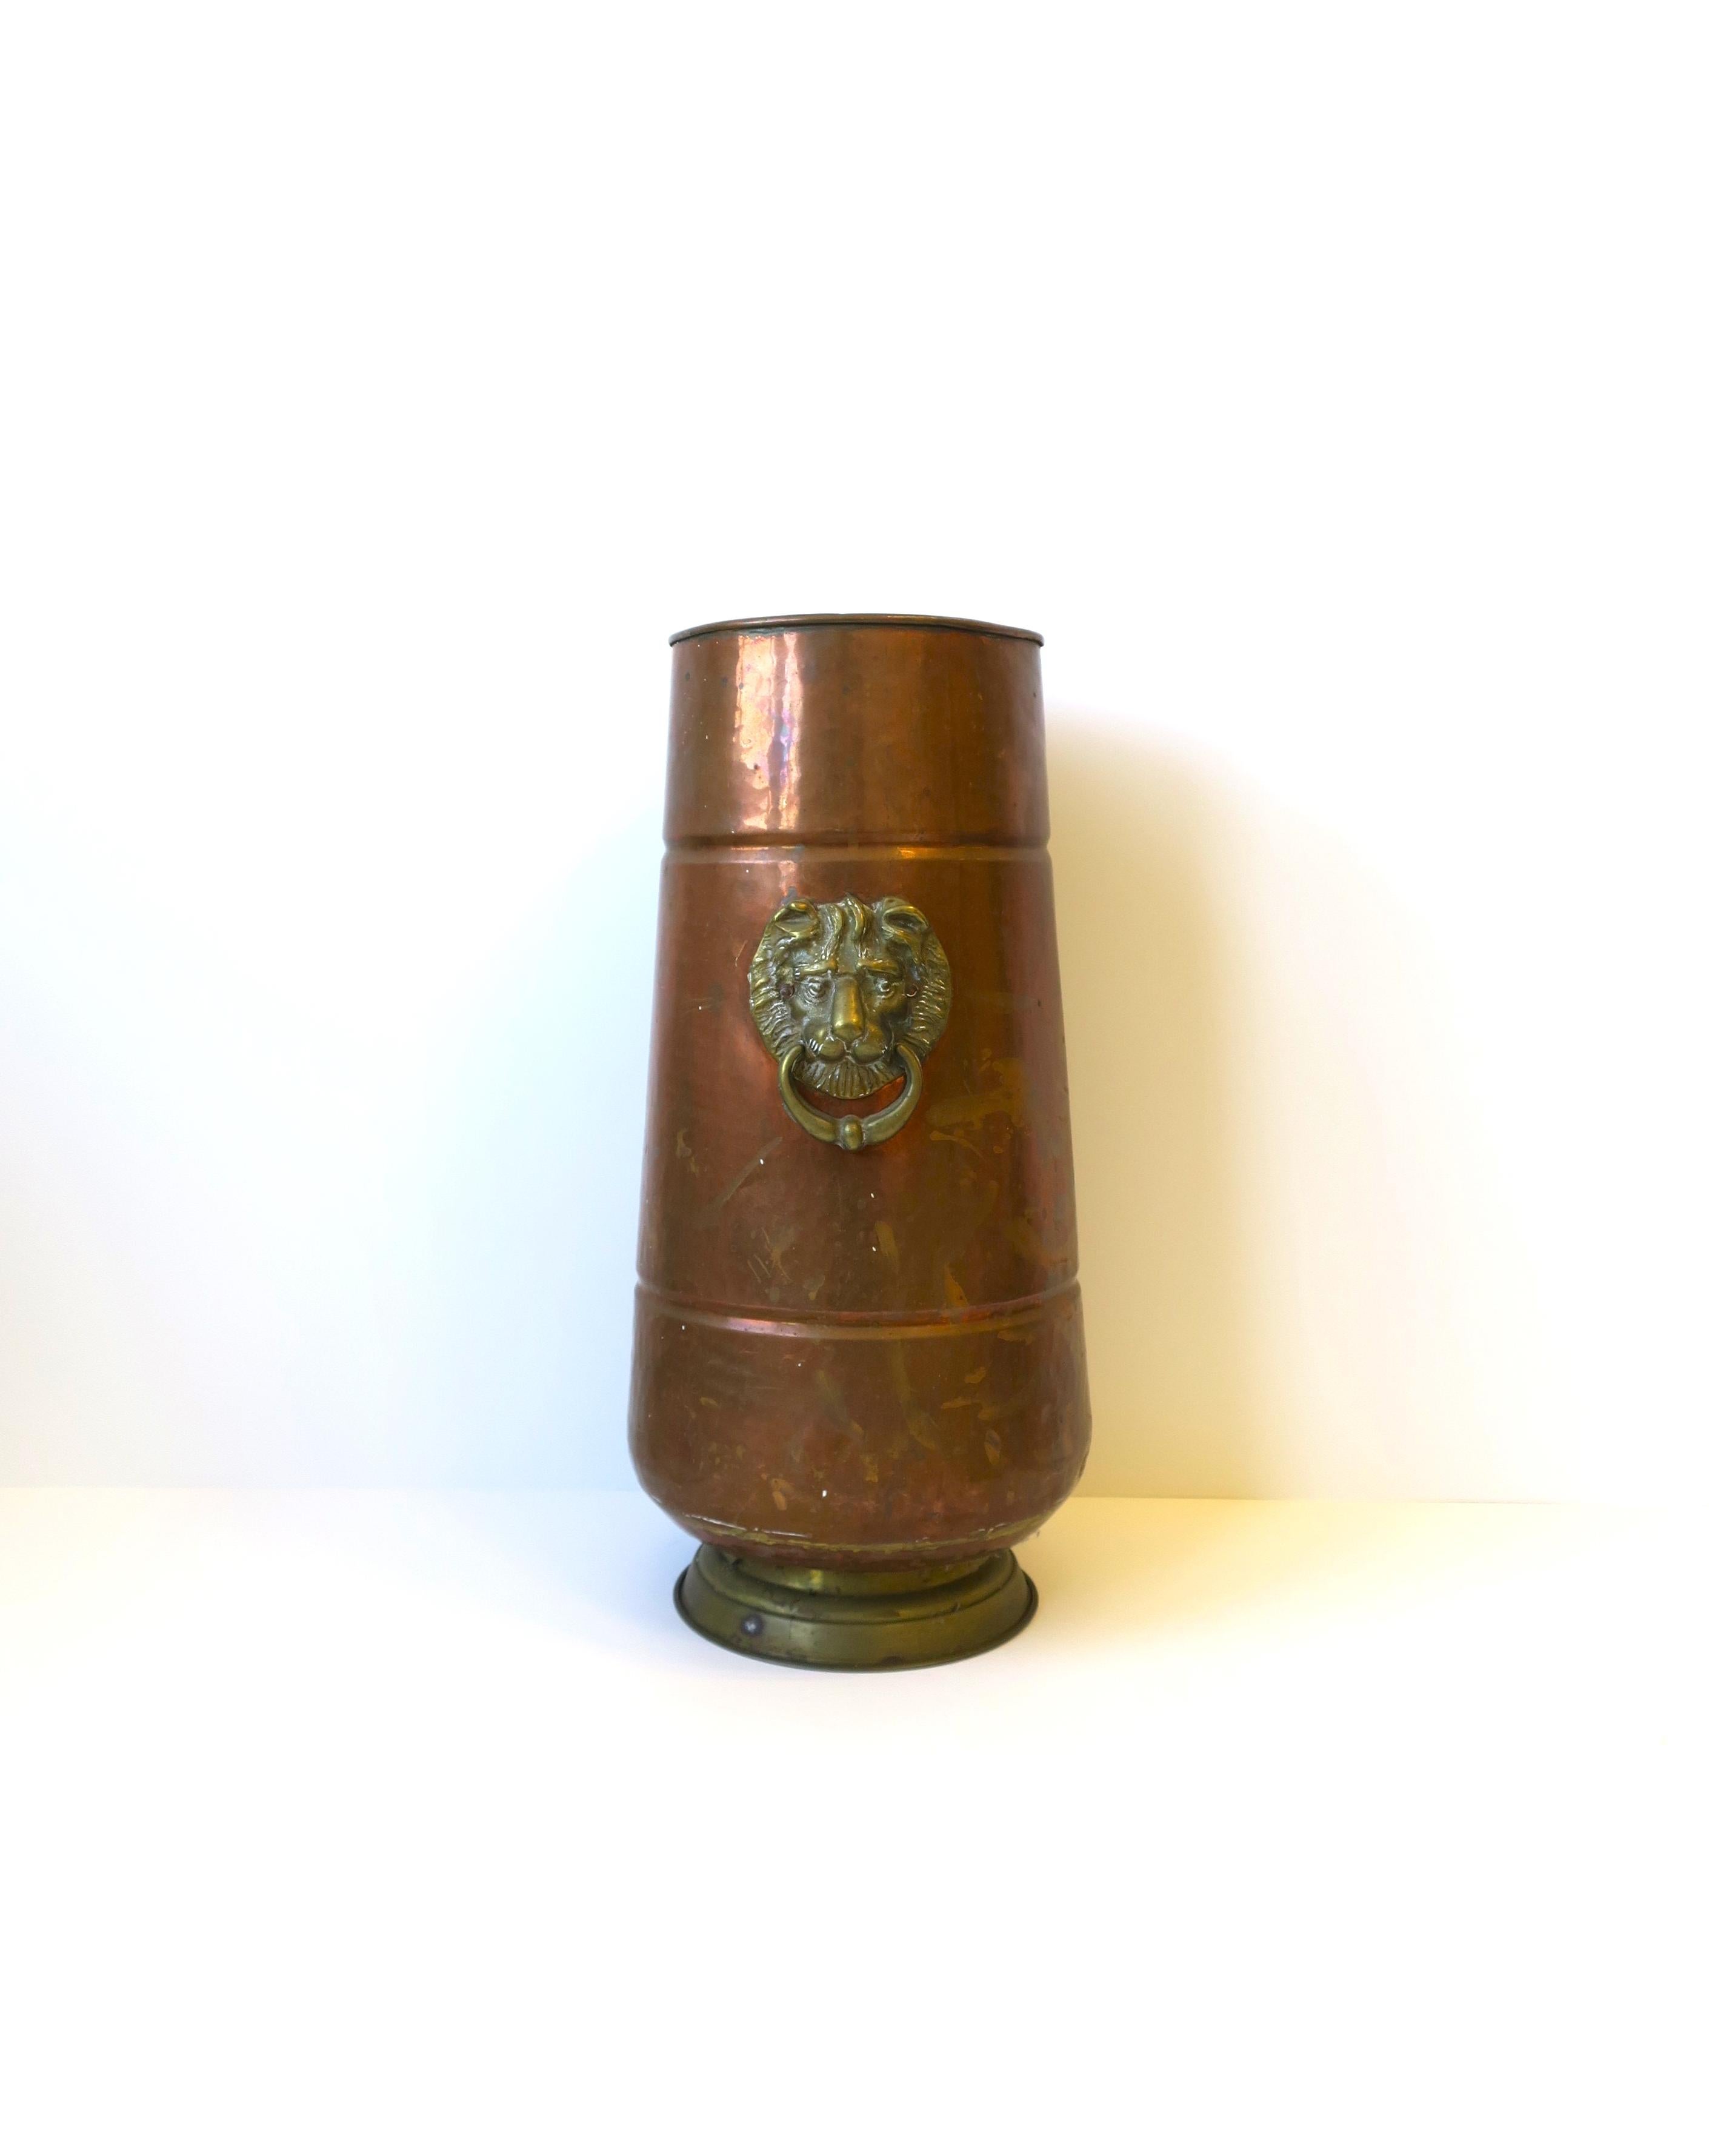 A copper and brass umbrella holder stand in the Regency style with lion head design, circa early to mid-20th century, Europe, Netherlands. Piece has a hand-hammer copper design with brass lion head and loop detail on two sides, finished with a brass